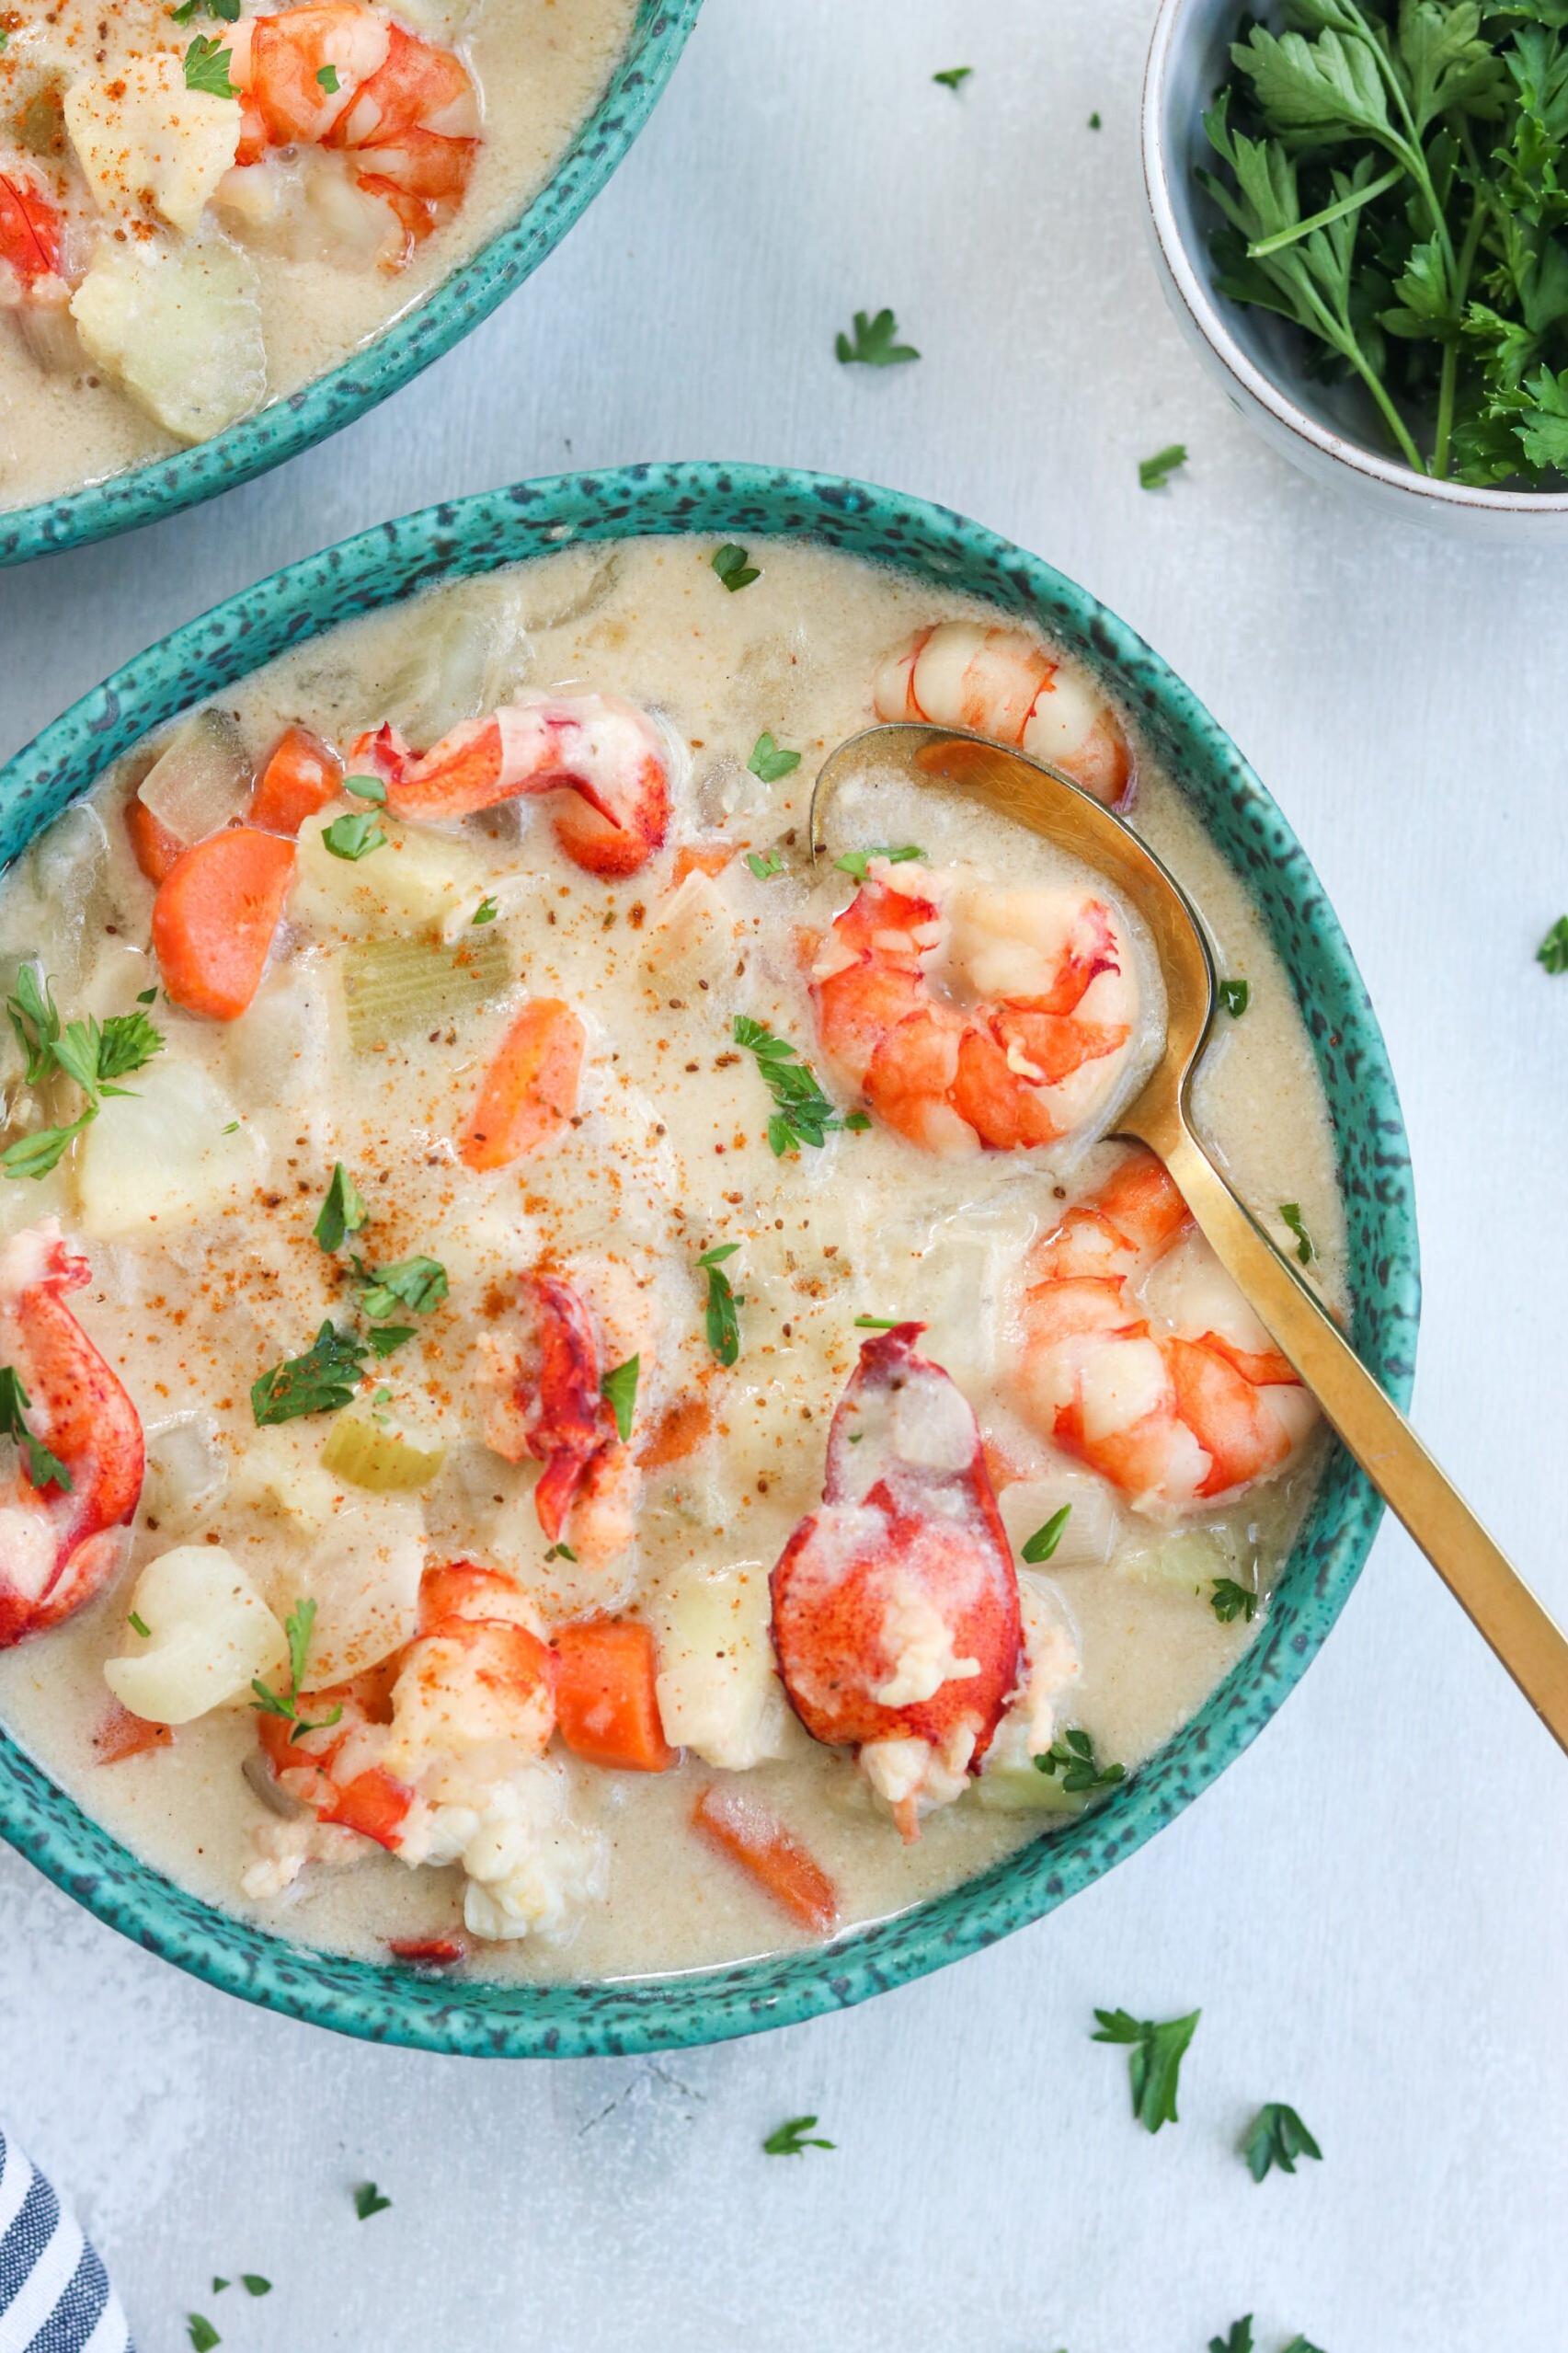  A dairy-free twist on a classic – try our Fish Chowder today!